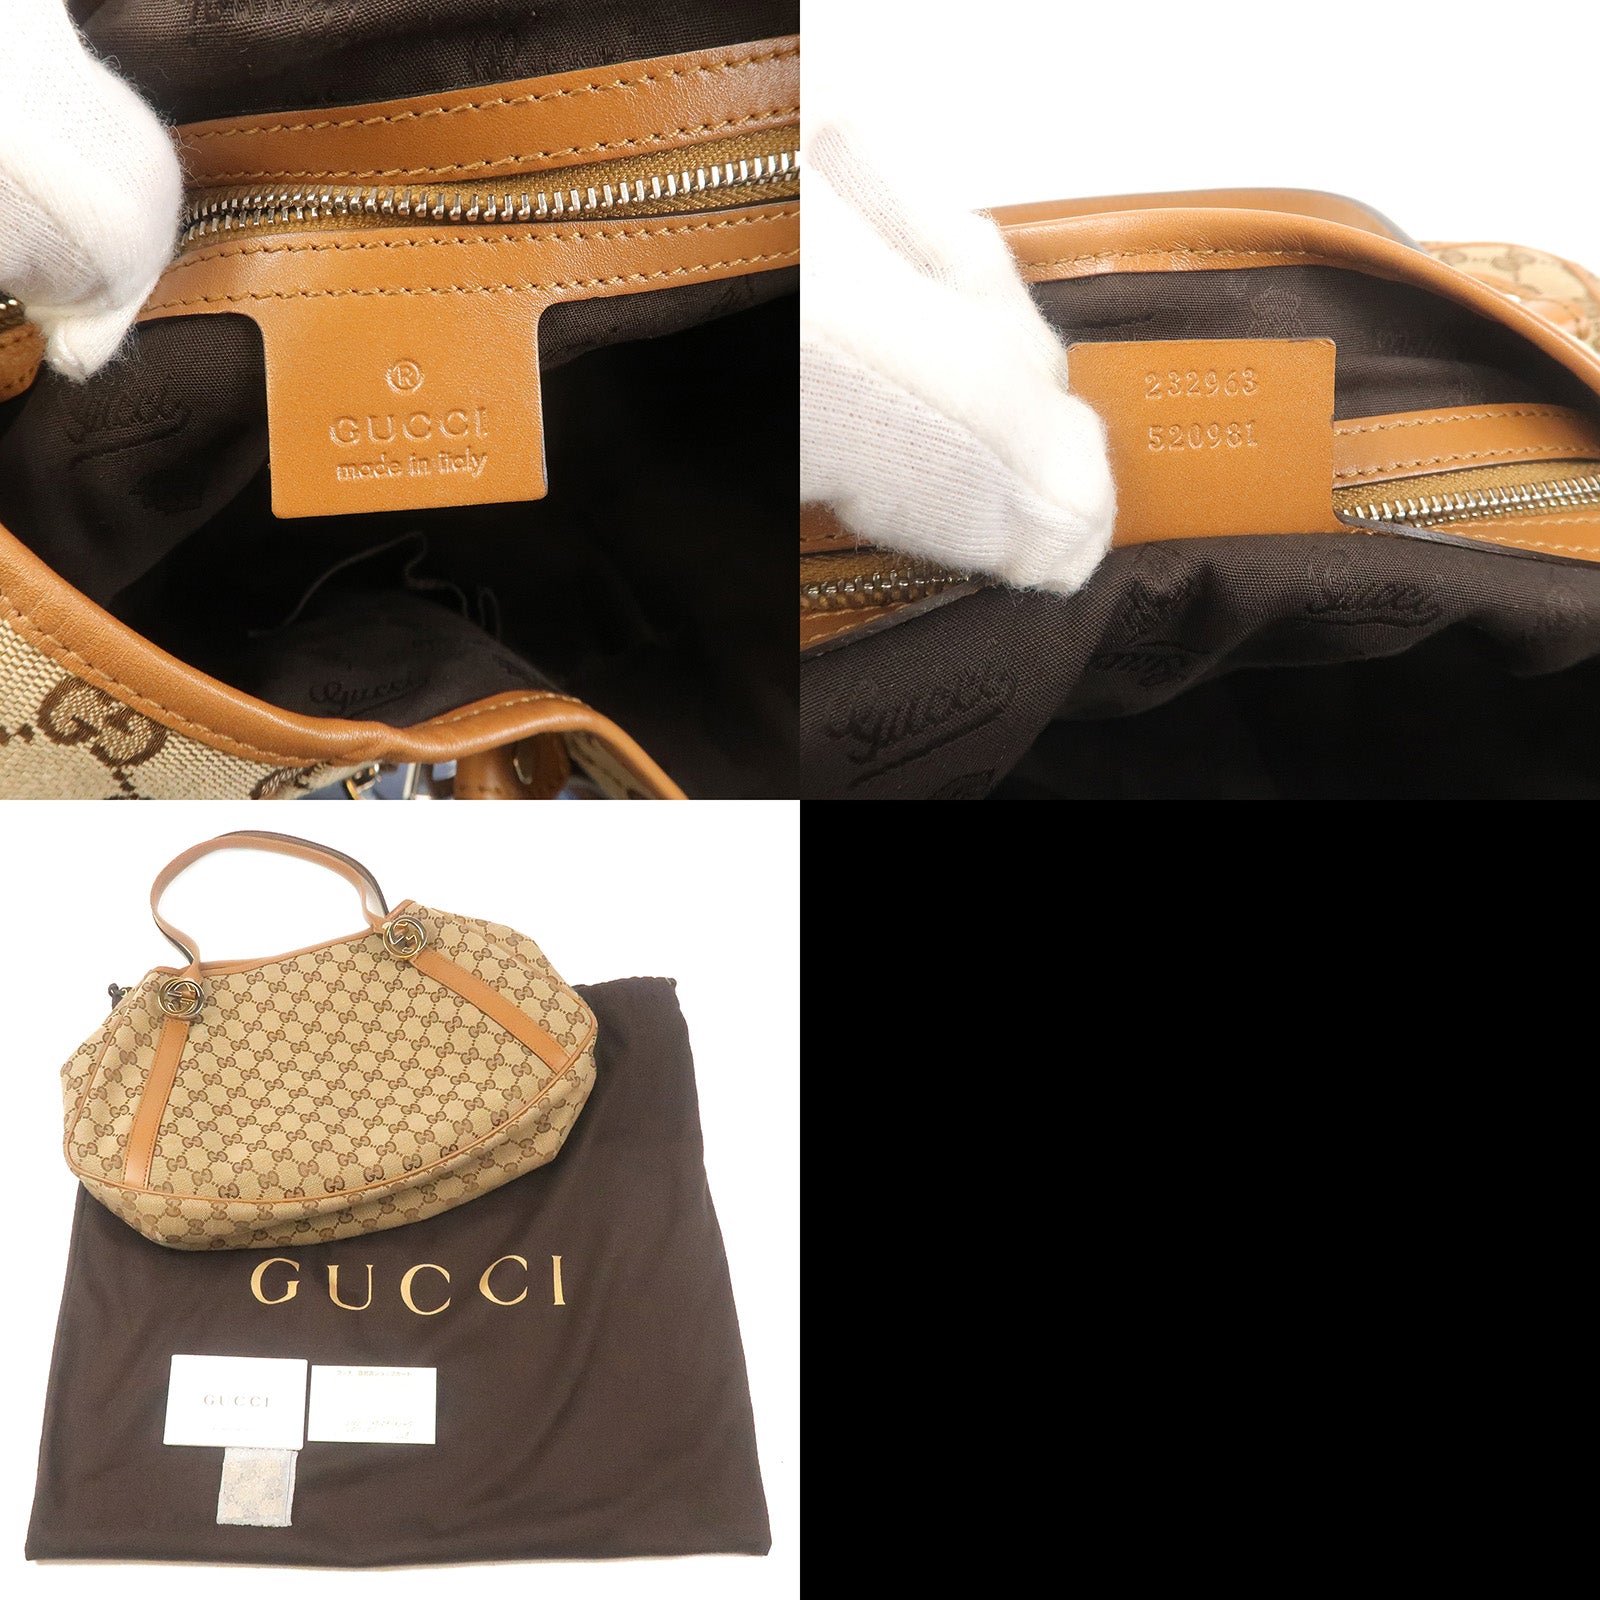 Beige - Twins - Bag - GUCCI - 232963 - Tote - Leather - Canvas